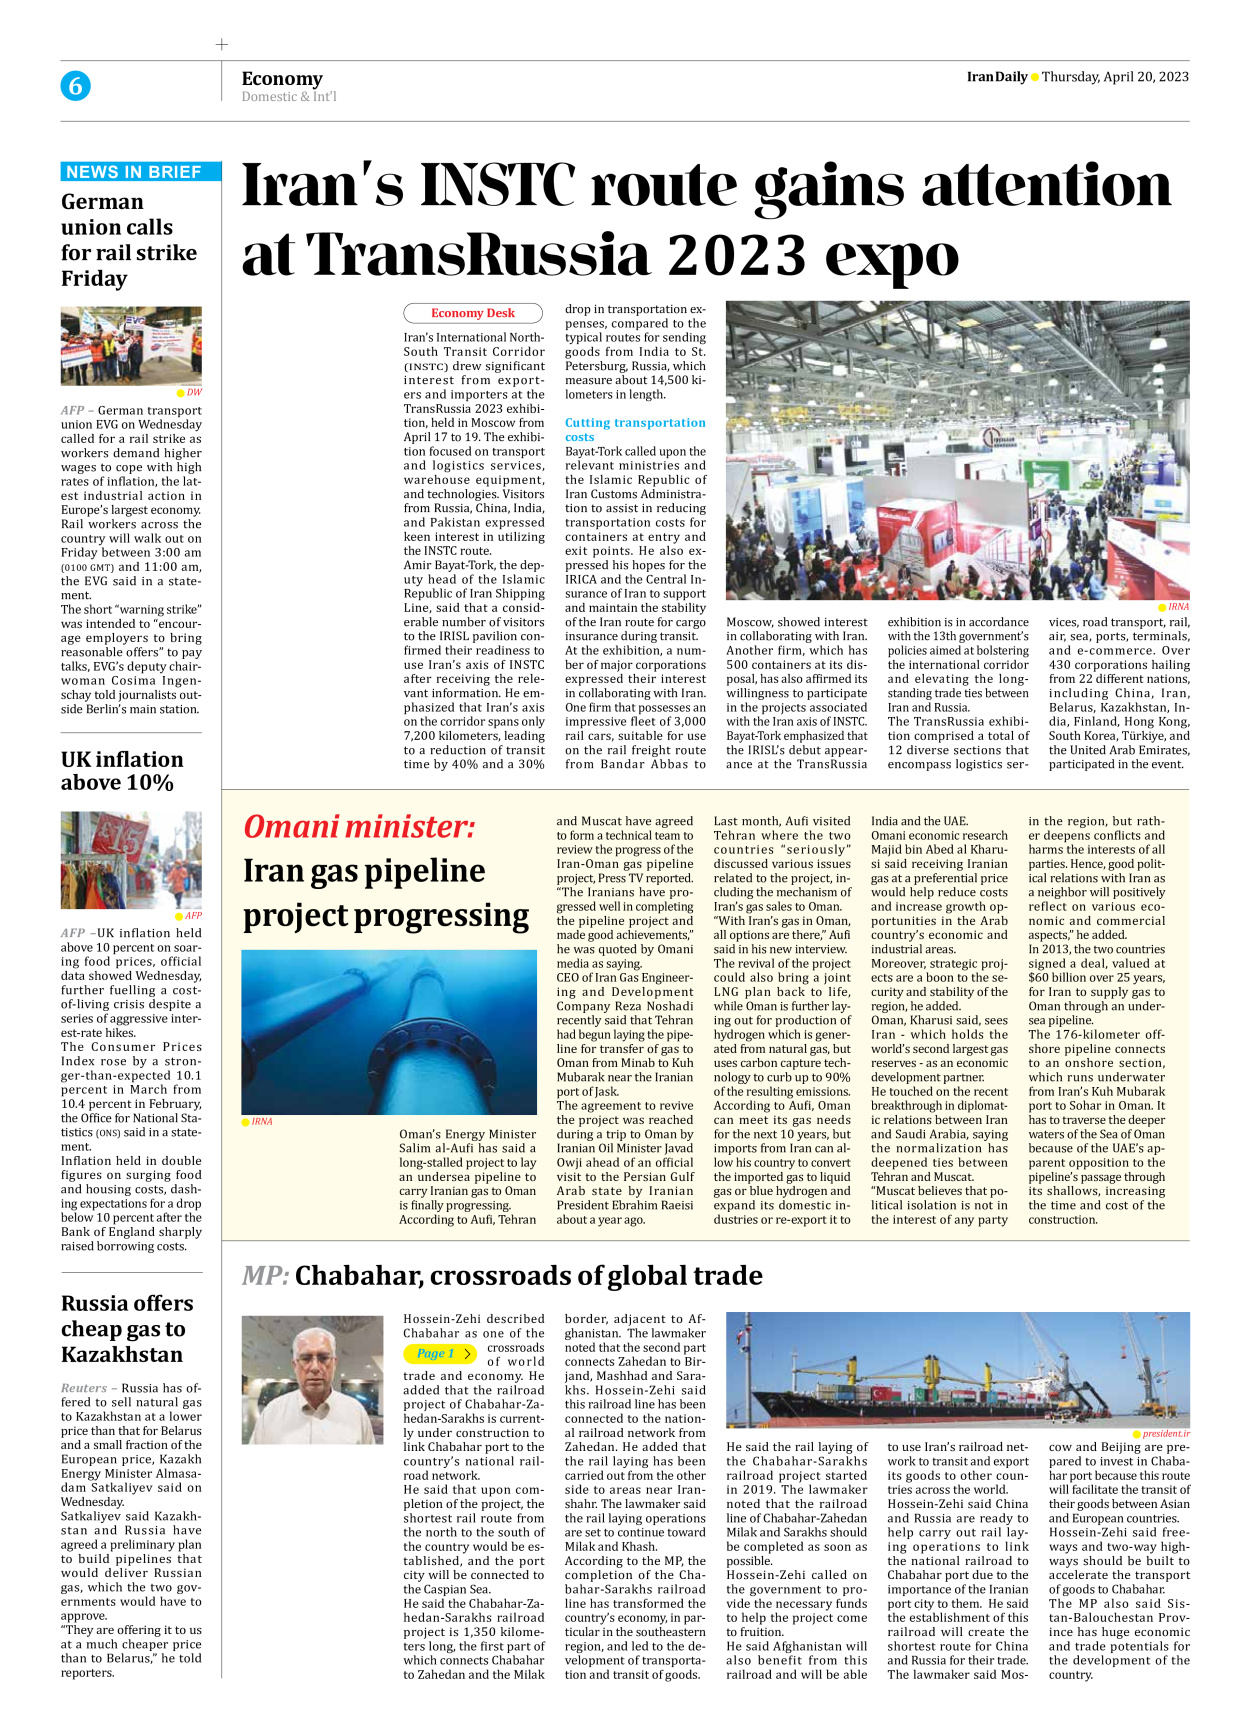 Iran Daily - Number Seven Thousand Two Hundred and Seventy Three - 20 April 2023 - Page 6